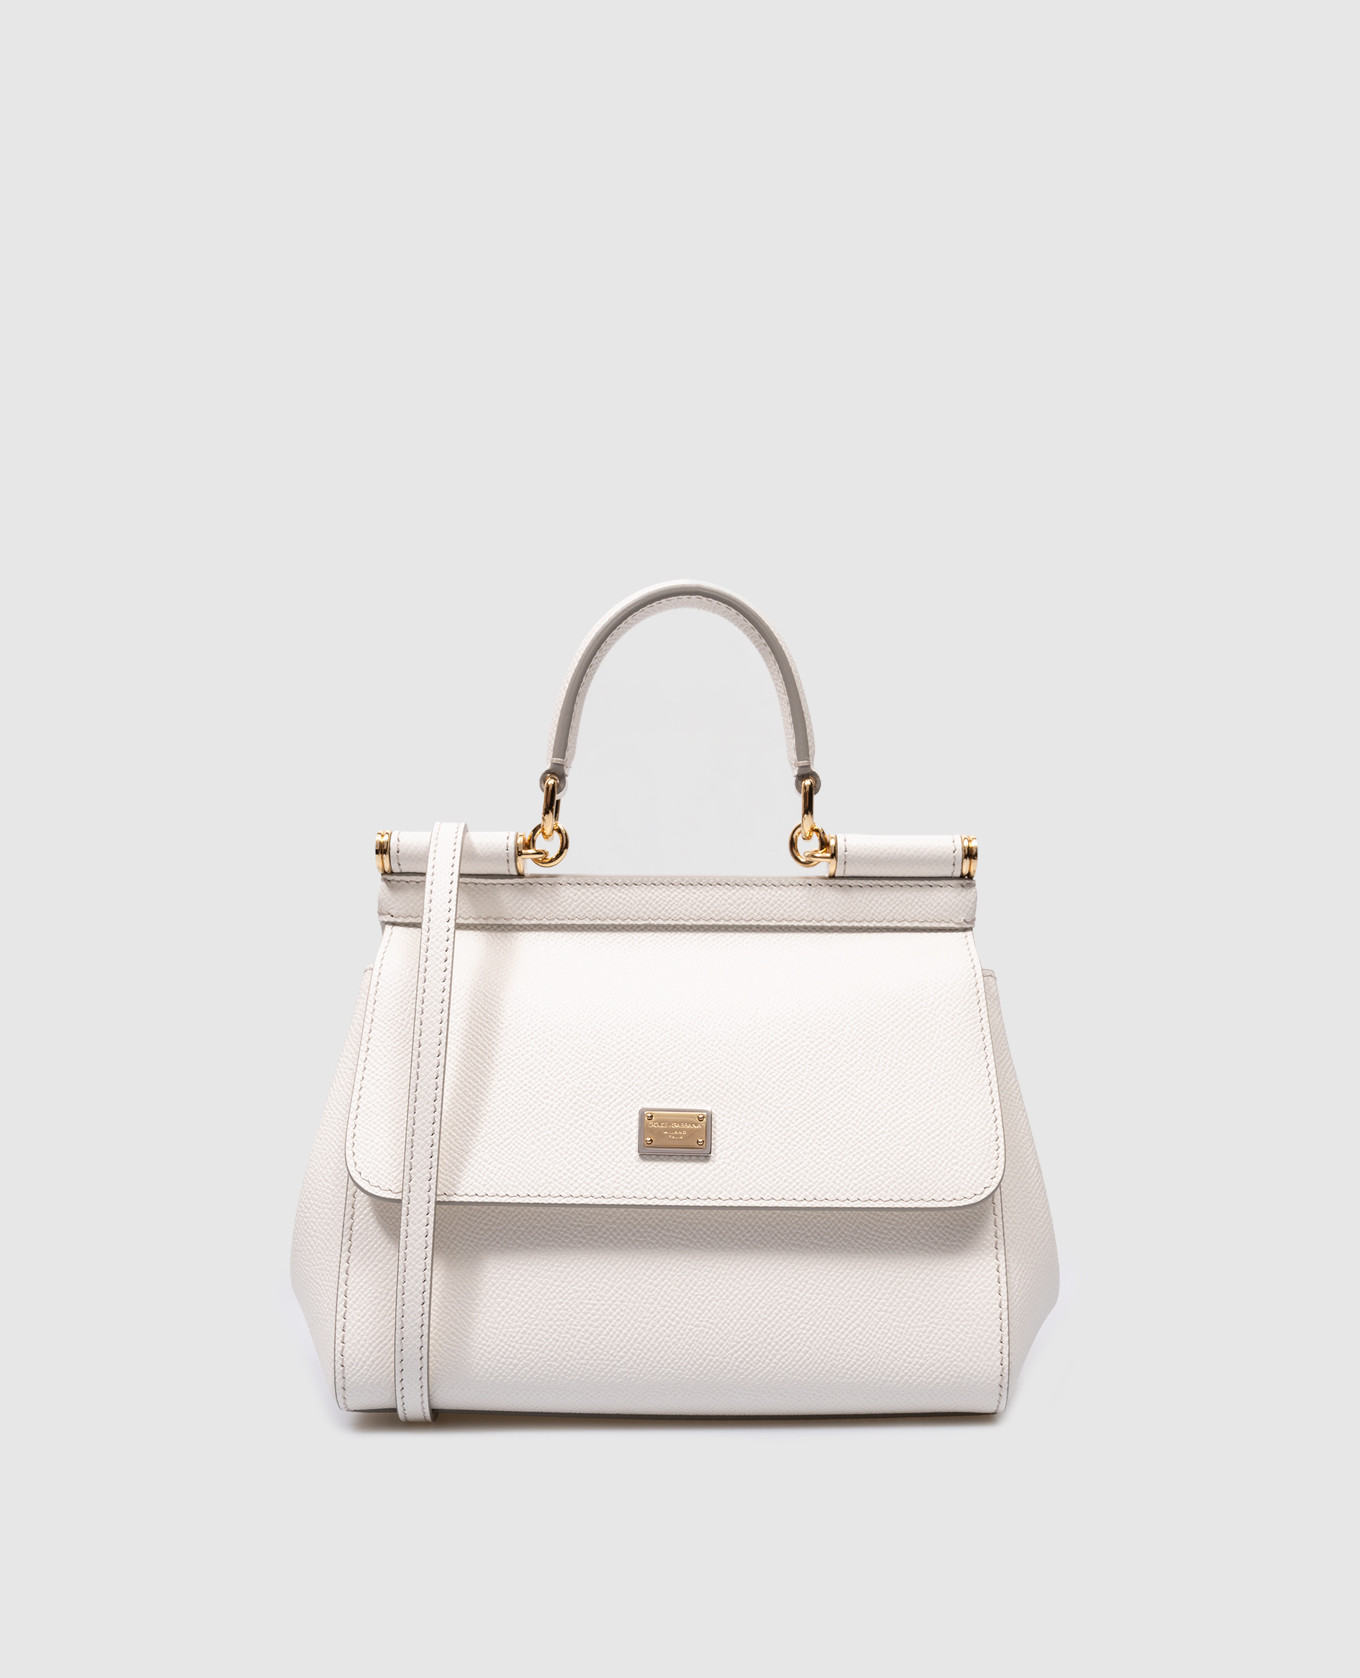 SICILY white leather satchel bag with metal logo